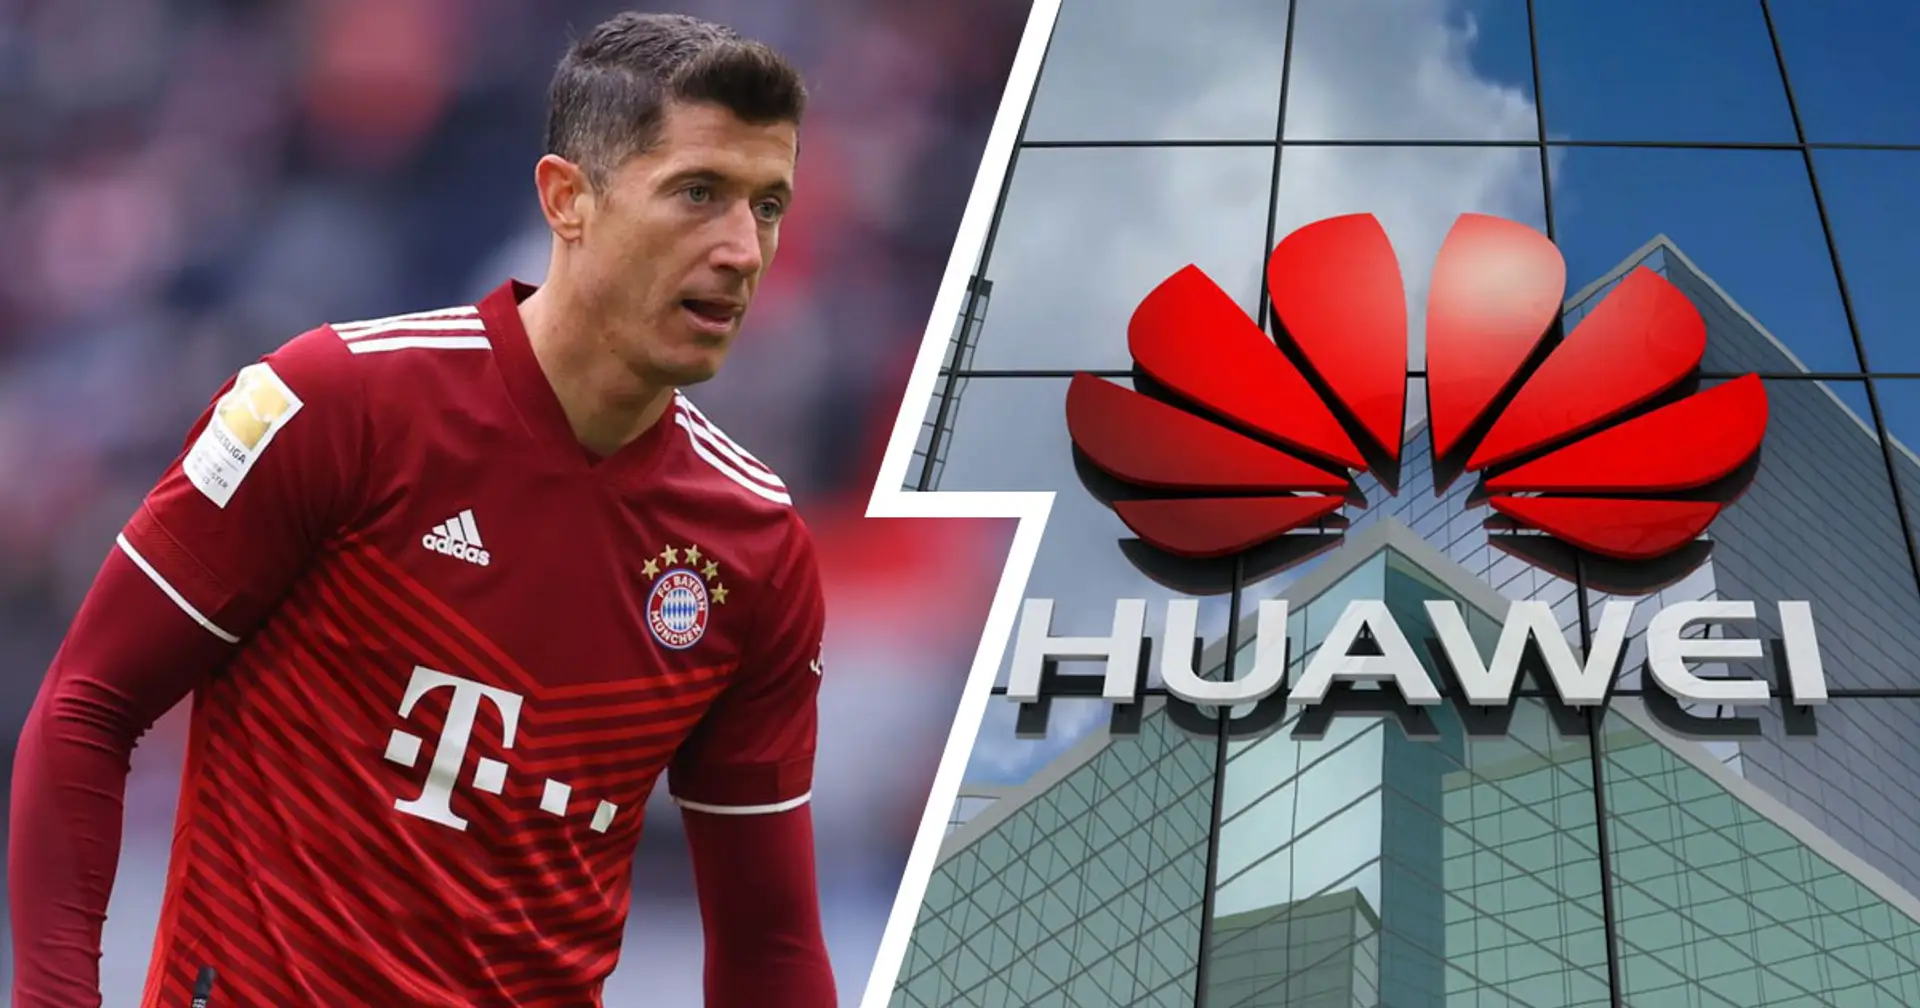 Robert Lewandowski ends partnership with Chinese brand Huawei for supporting Russia